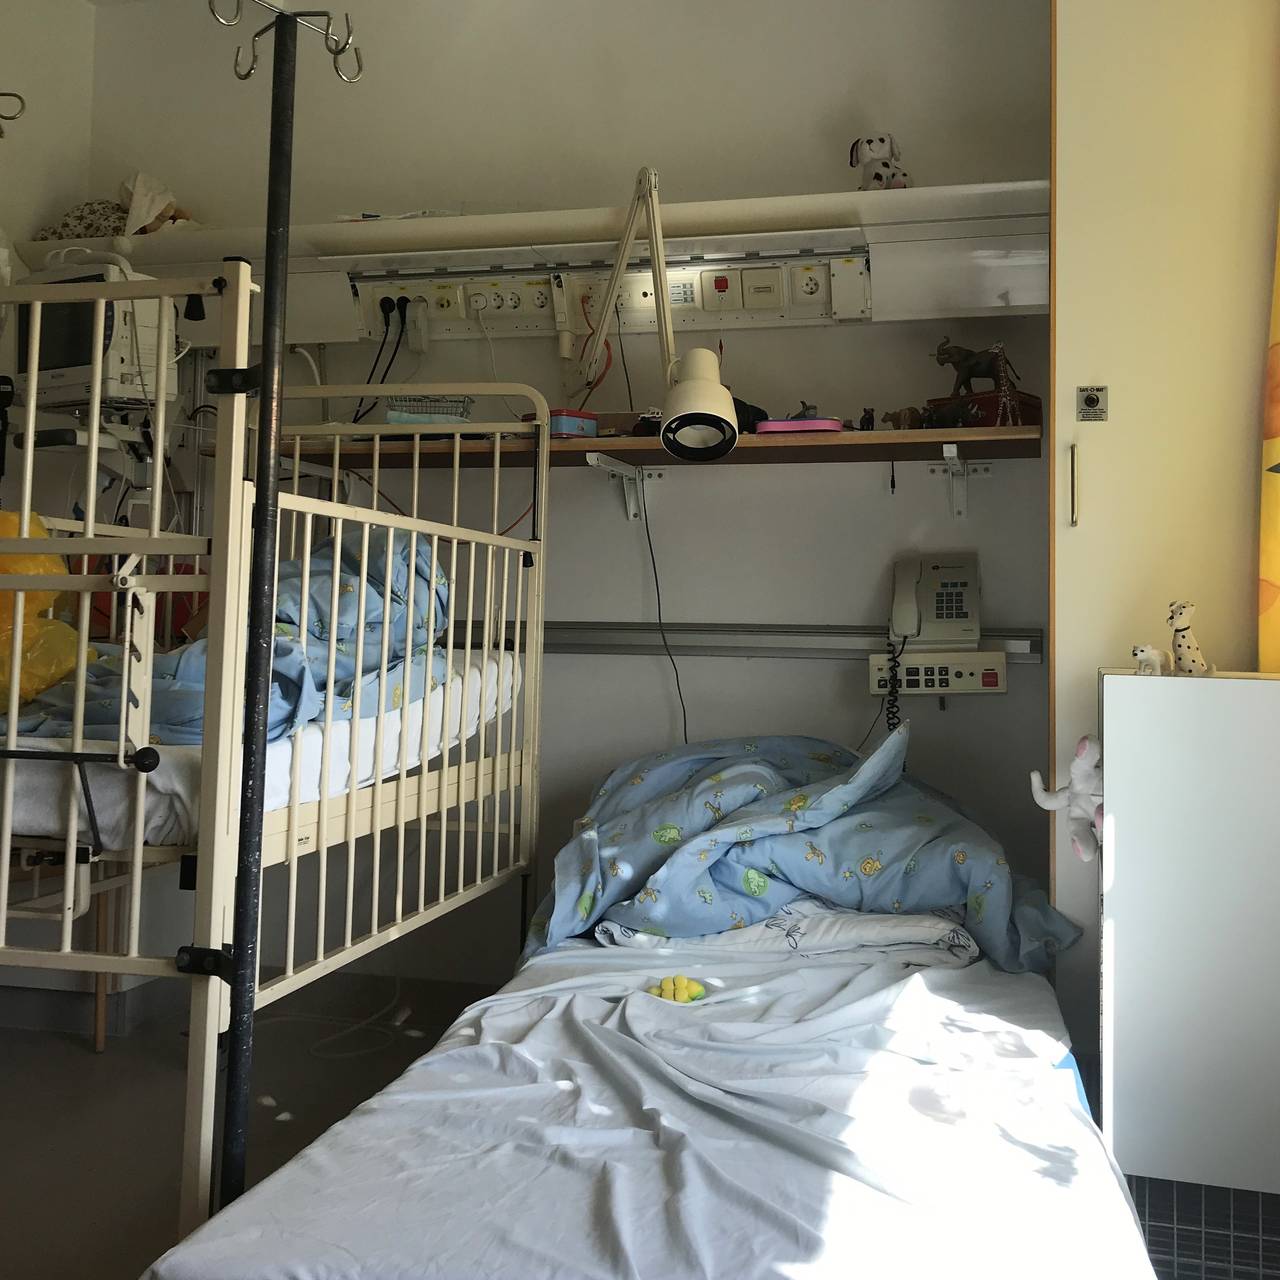 The daughter spent several months in solitary confinement.  This means 12 square meters to live without the possibility of going out at the risk of contracting hospital bacteria.